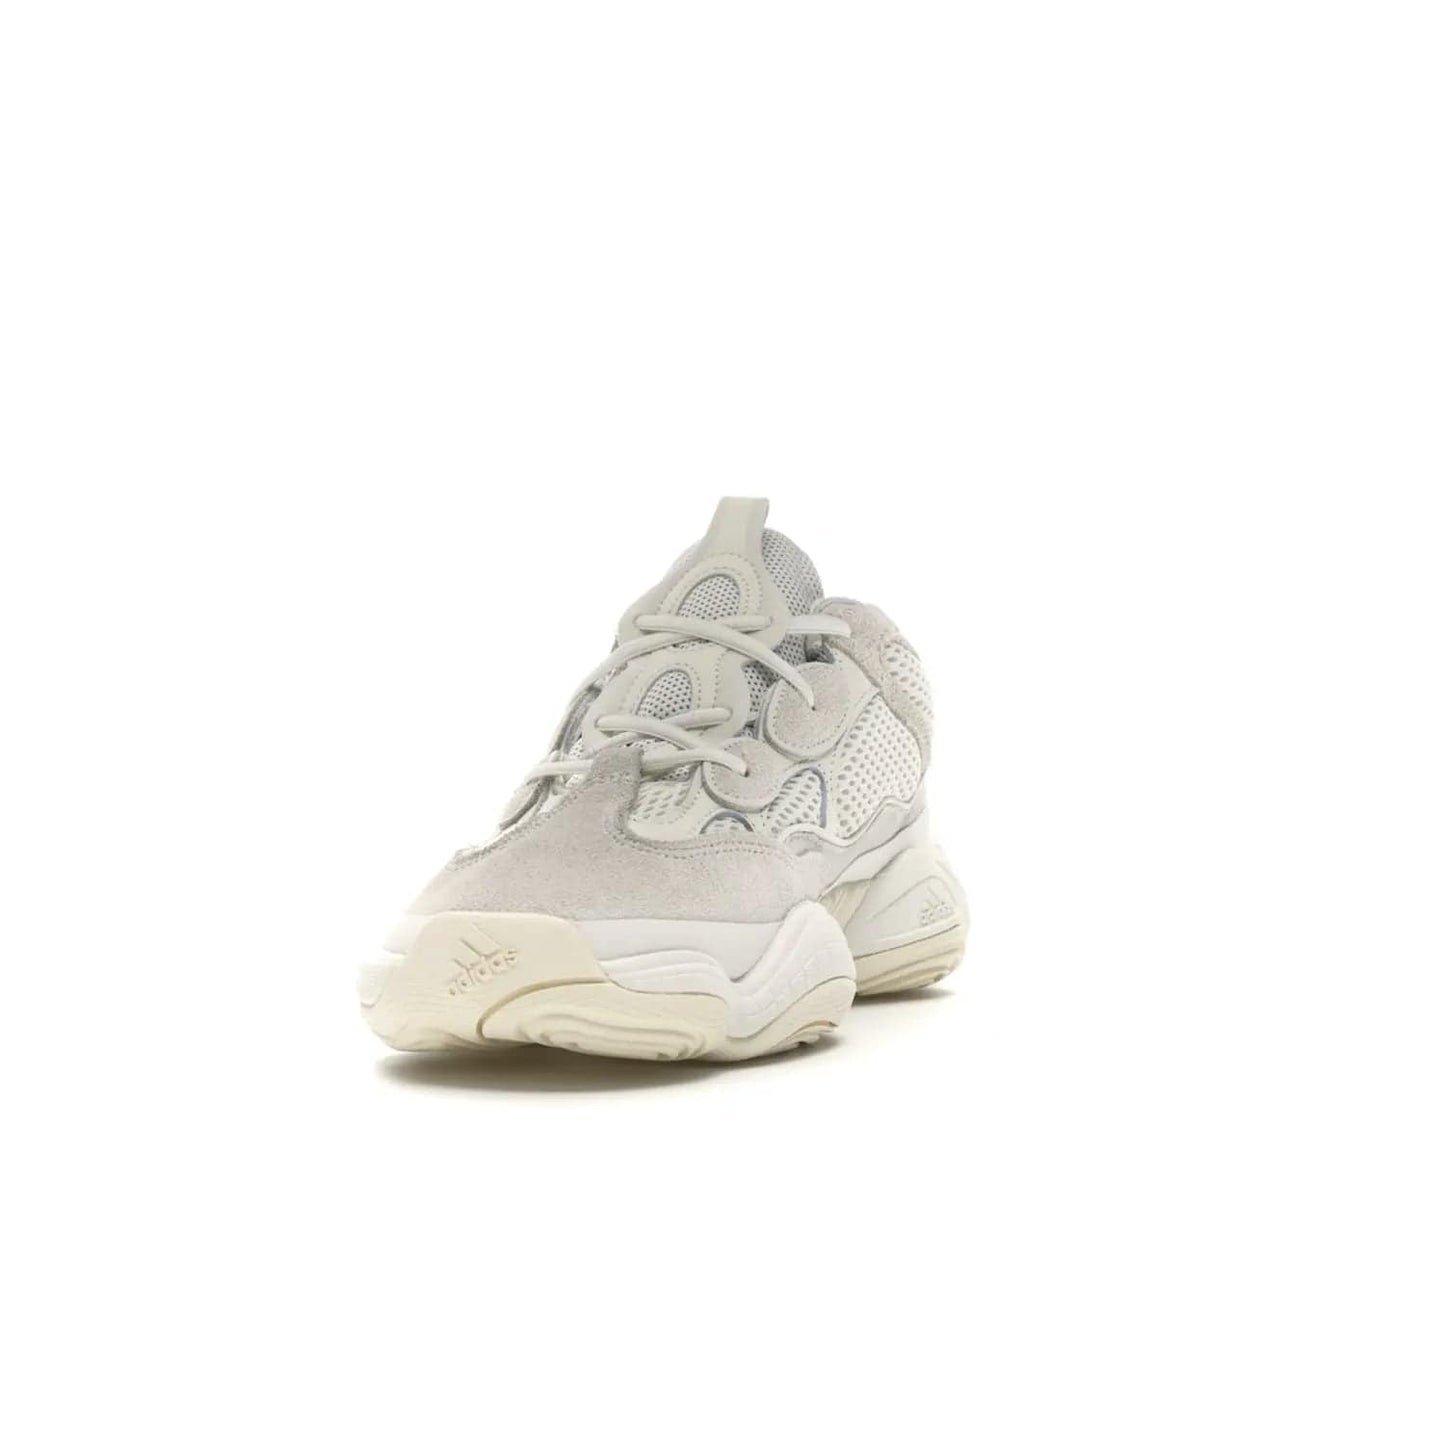 adidas Yeezy 500 Bone White - Image 12 - Only at www.BallersClubKickz.com - Classic look perfect for any sneaker collection. The adidas Yeezy 500 "Bone White" blends a white mesh upper with suede overlays & a chunky midsole inspired by the Adidas KB3. Complimented by a tonal-cream outsole, this timeless style is a must-have.